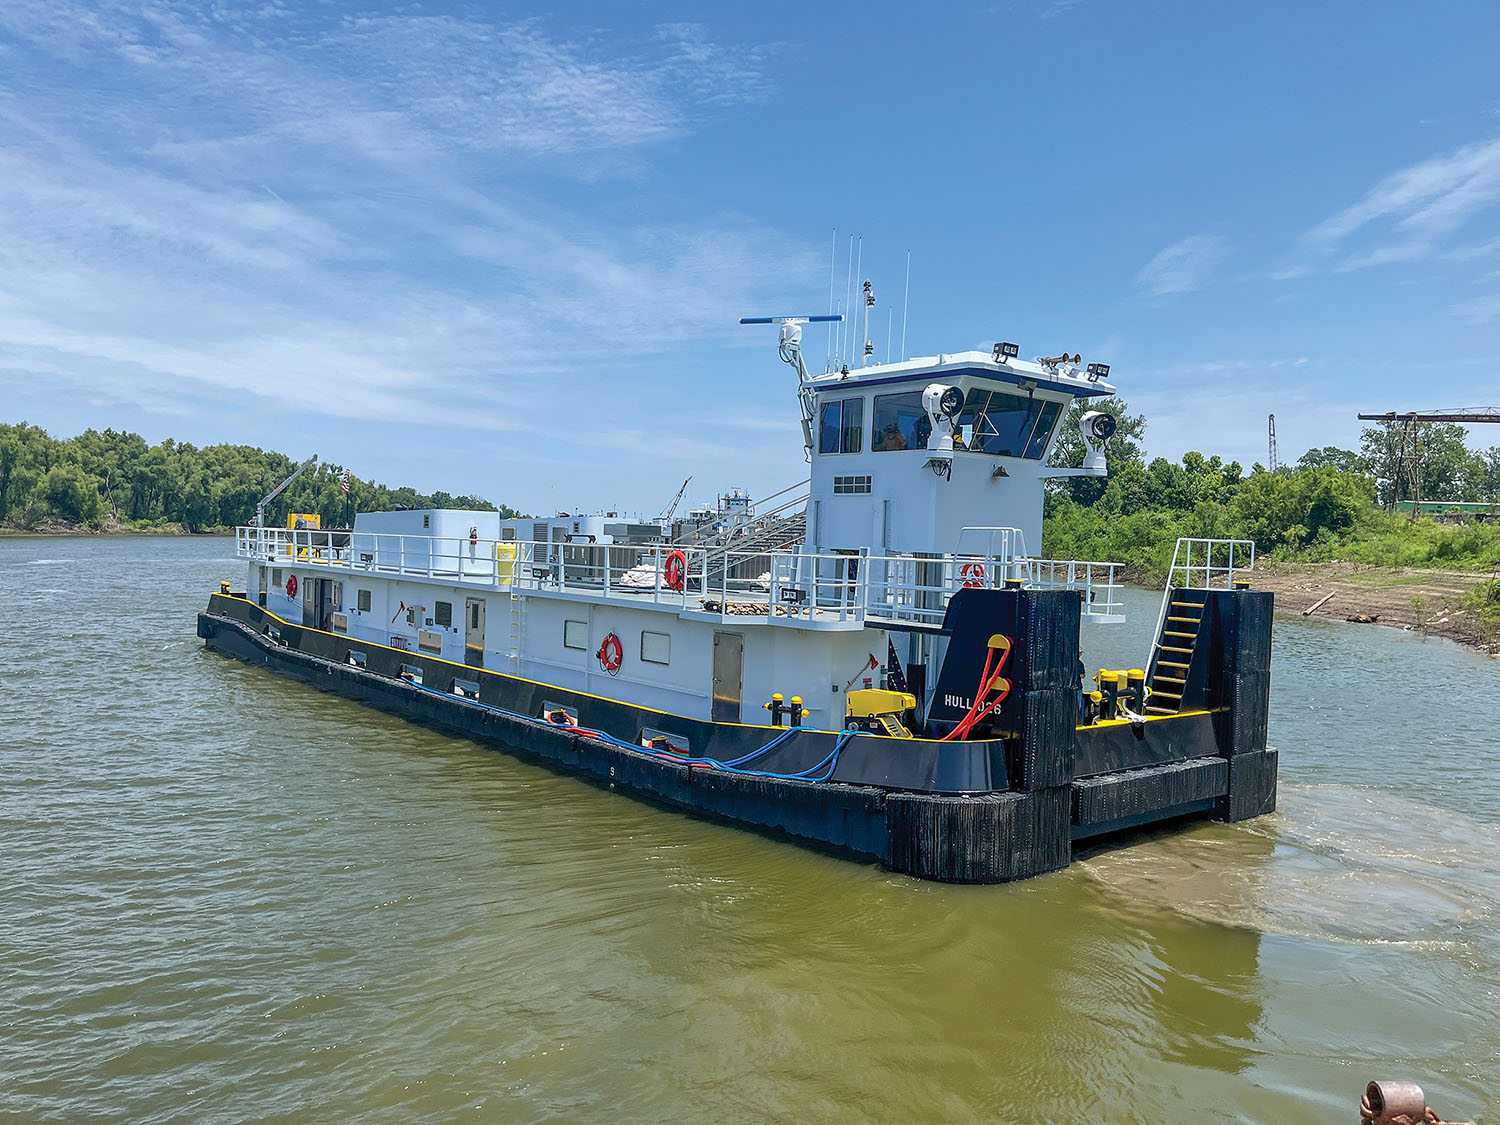 Nichols Boat Company of Greenville, Miss., recently completed its 26th towboat. The 3,400-hp. twin-screw towboat has a retractable pilothouse. (Photo courtesy of Nichols Boat Company)